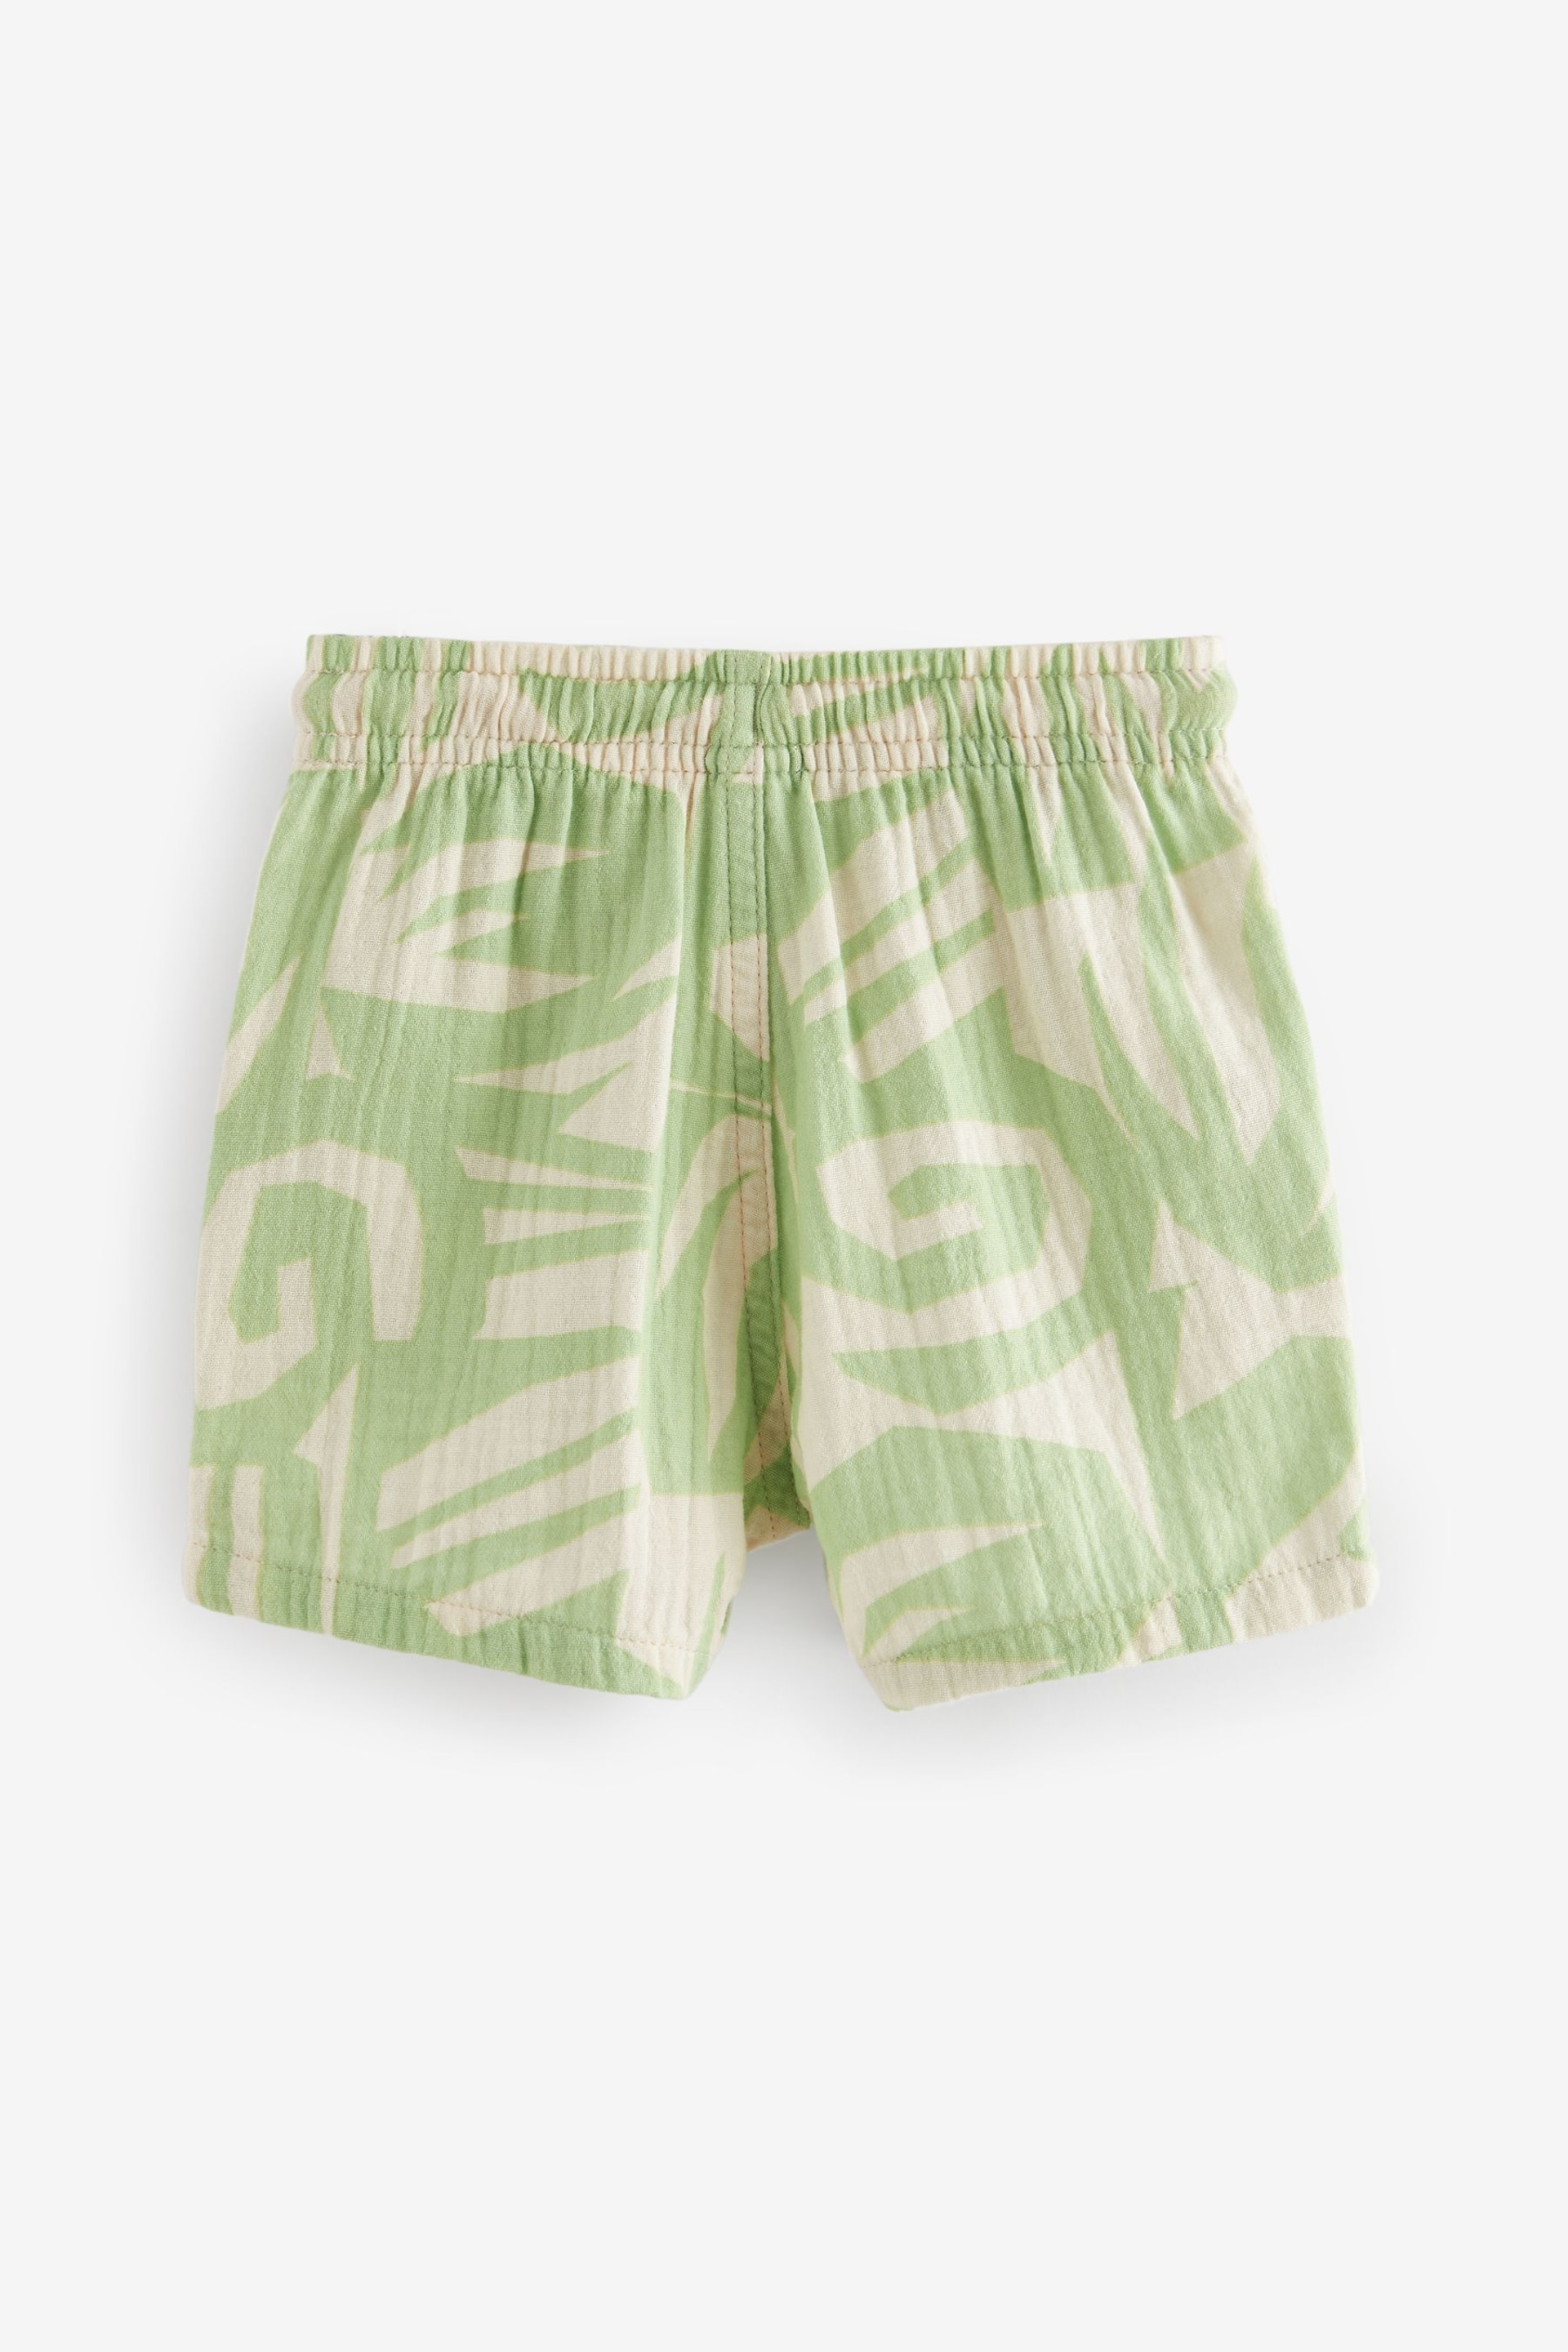 Mint Green Soft Textured Cotton Printed Shorts (3mths-7yrs) - Image 6 of 7